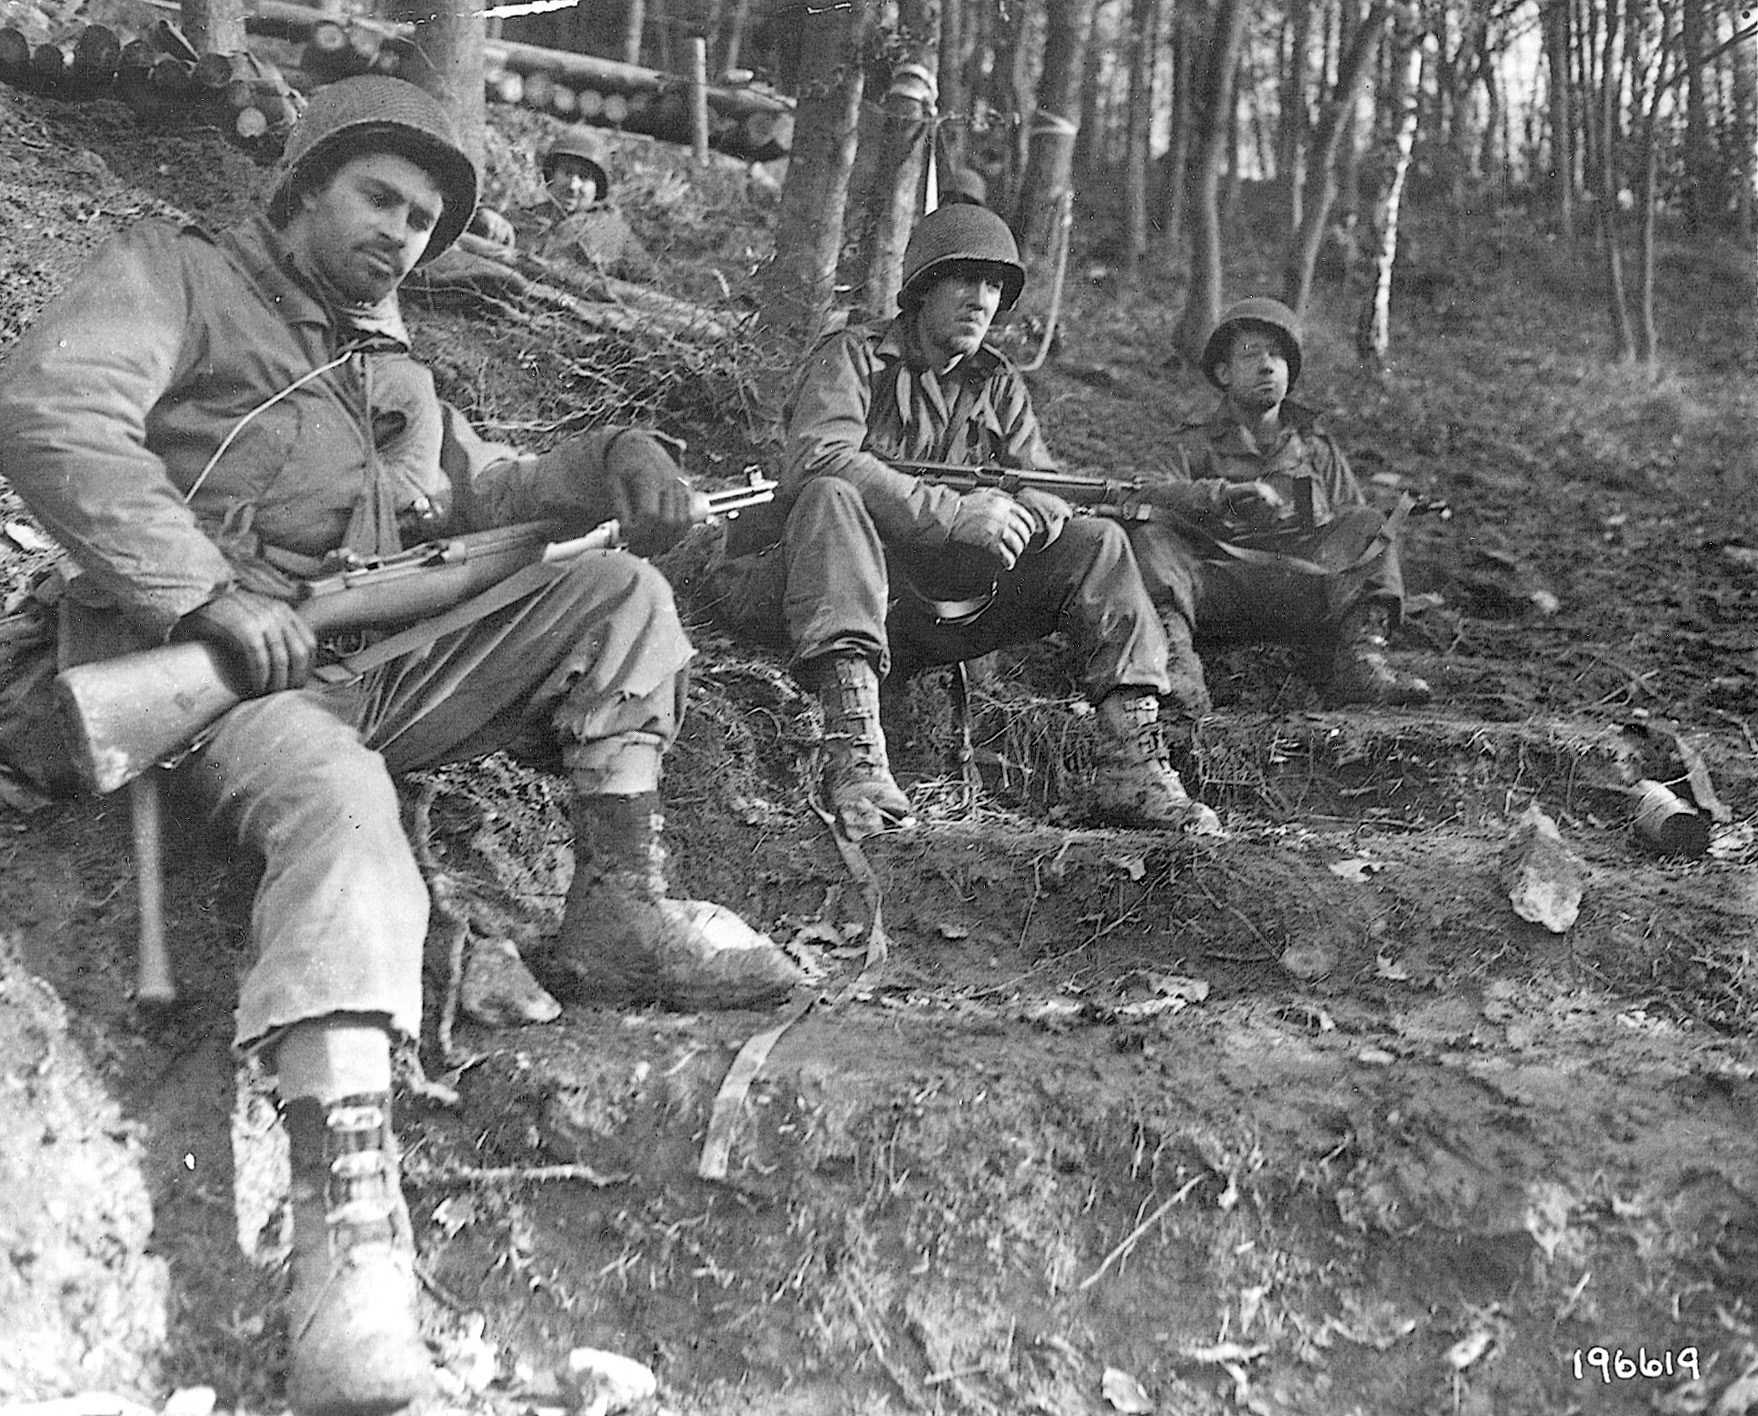 During the lull in the fighting on November 18, 1944, the faces of these Americans reflect the strain of combat in the Huertgen Forest.